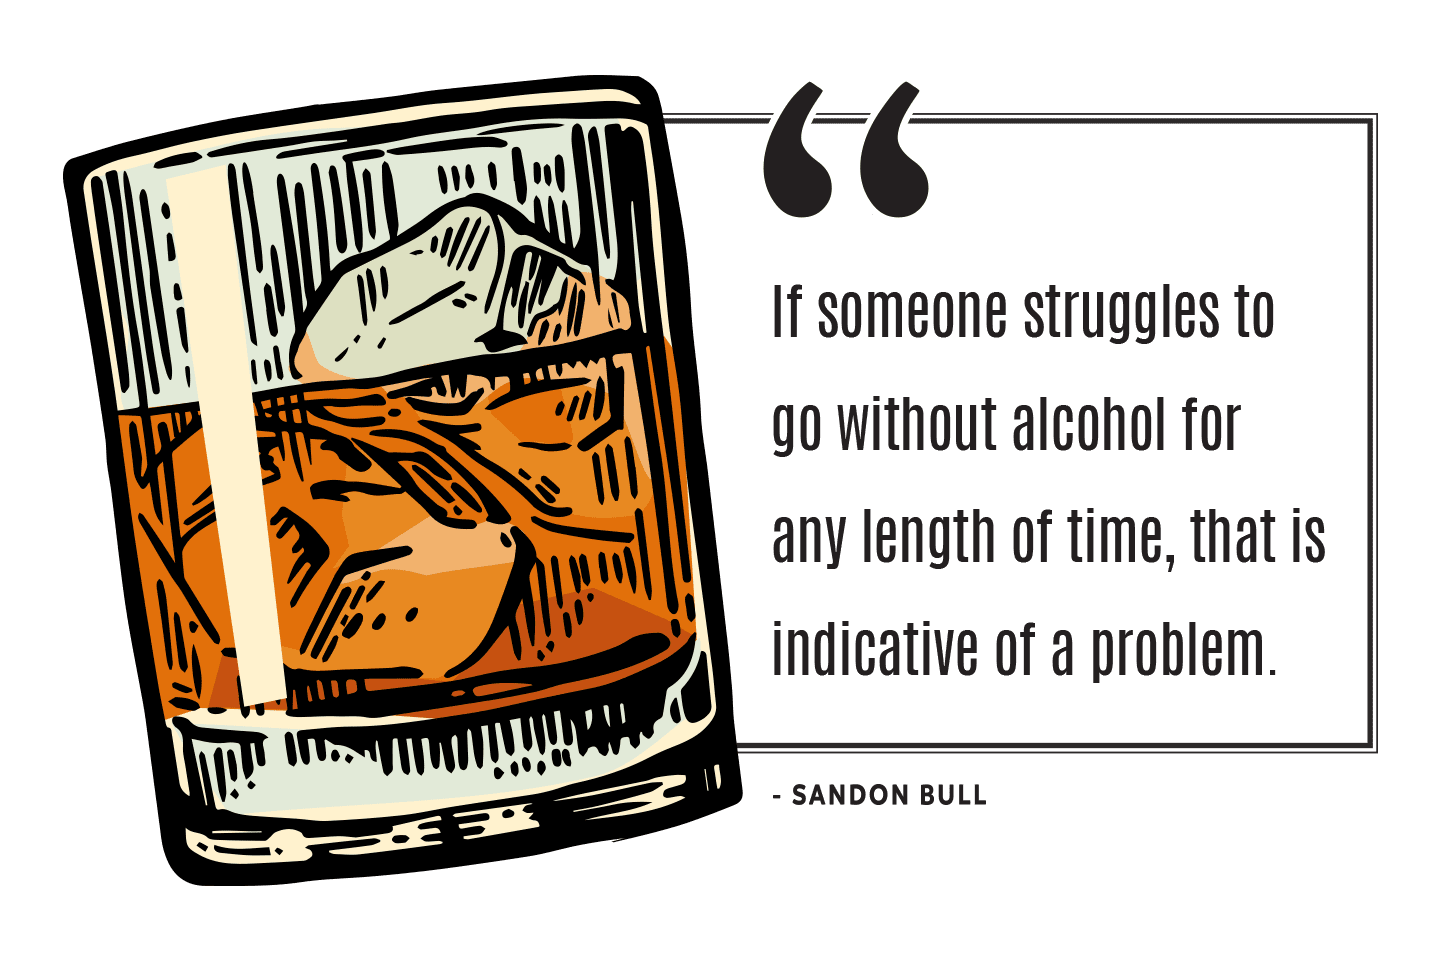 if someone struggles to go without alcohol for any length of time, that is indicative of a problem sandon bull chattanooga